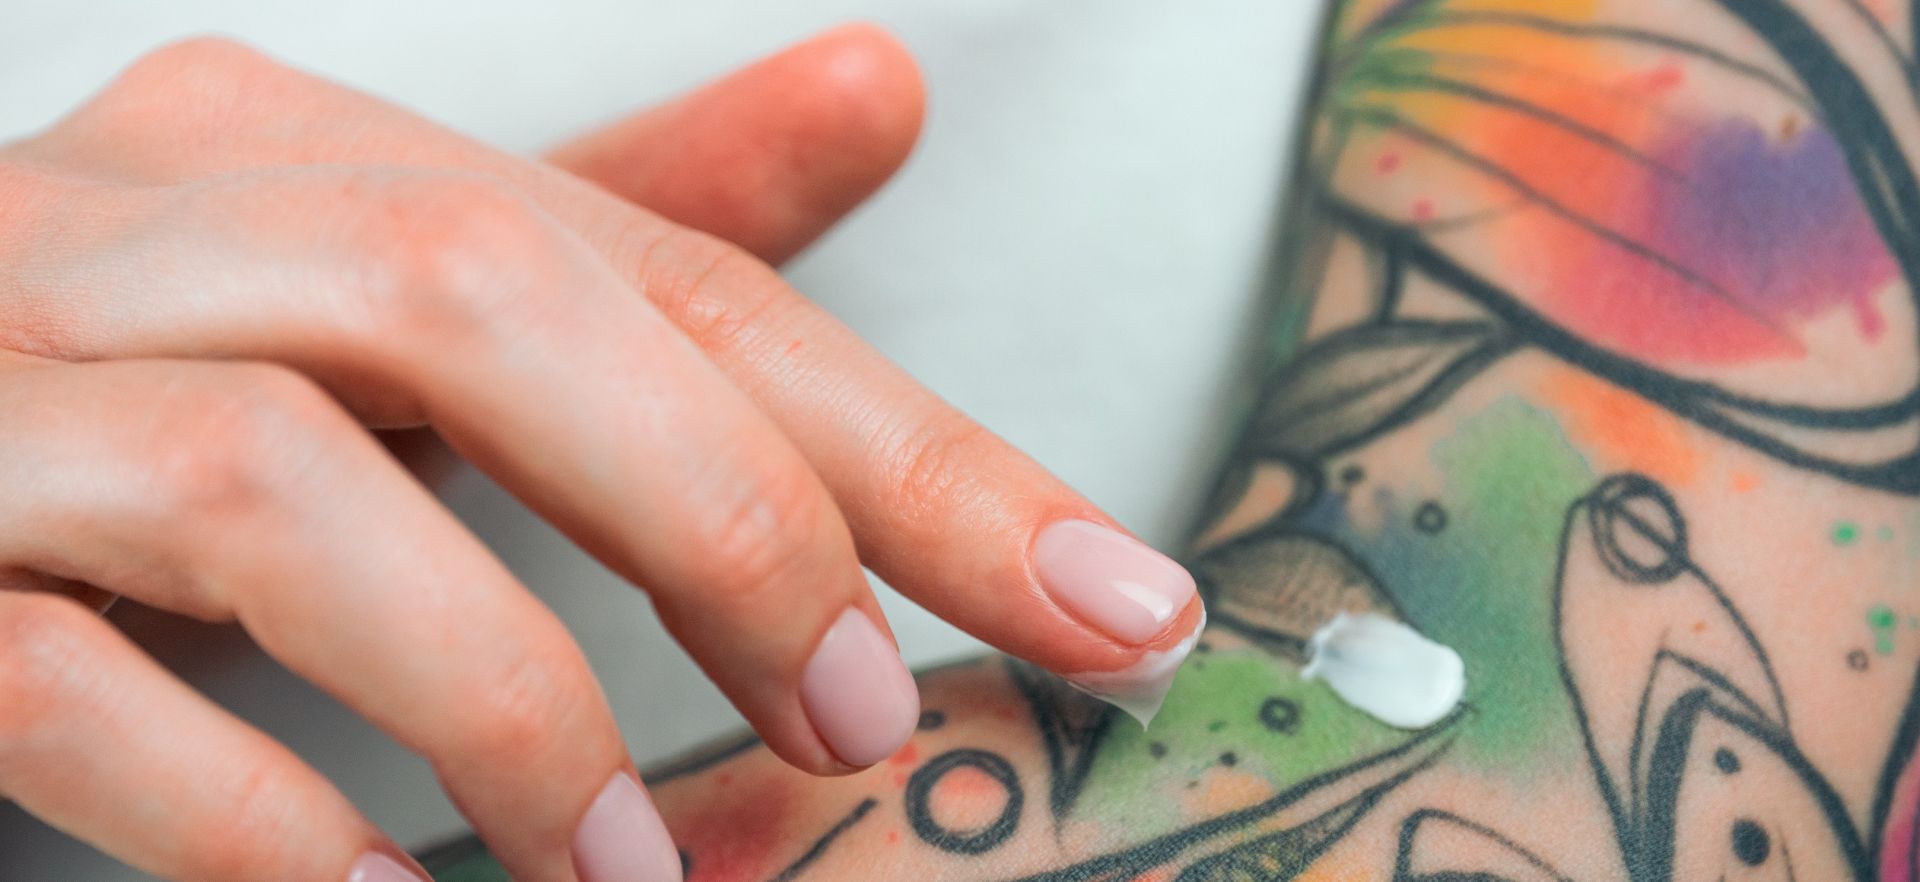 A tattooed left arm with the right hand spreading cream on the tattoo.